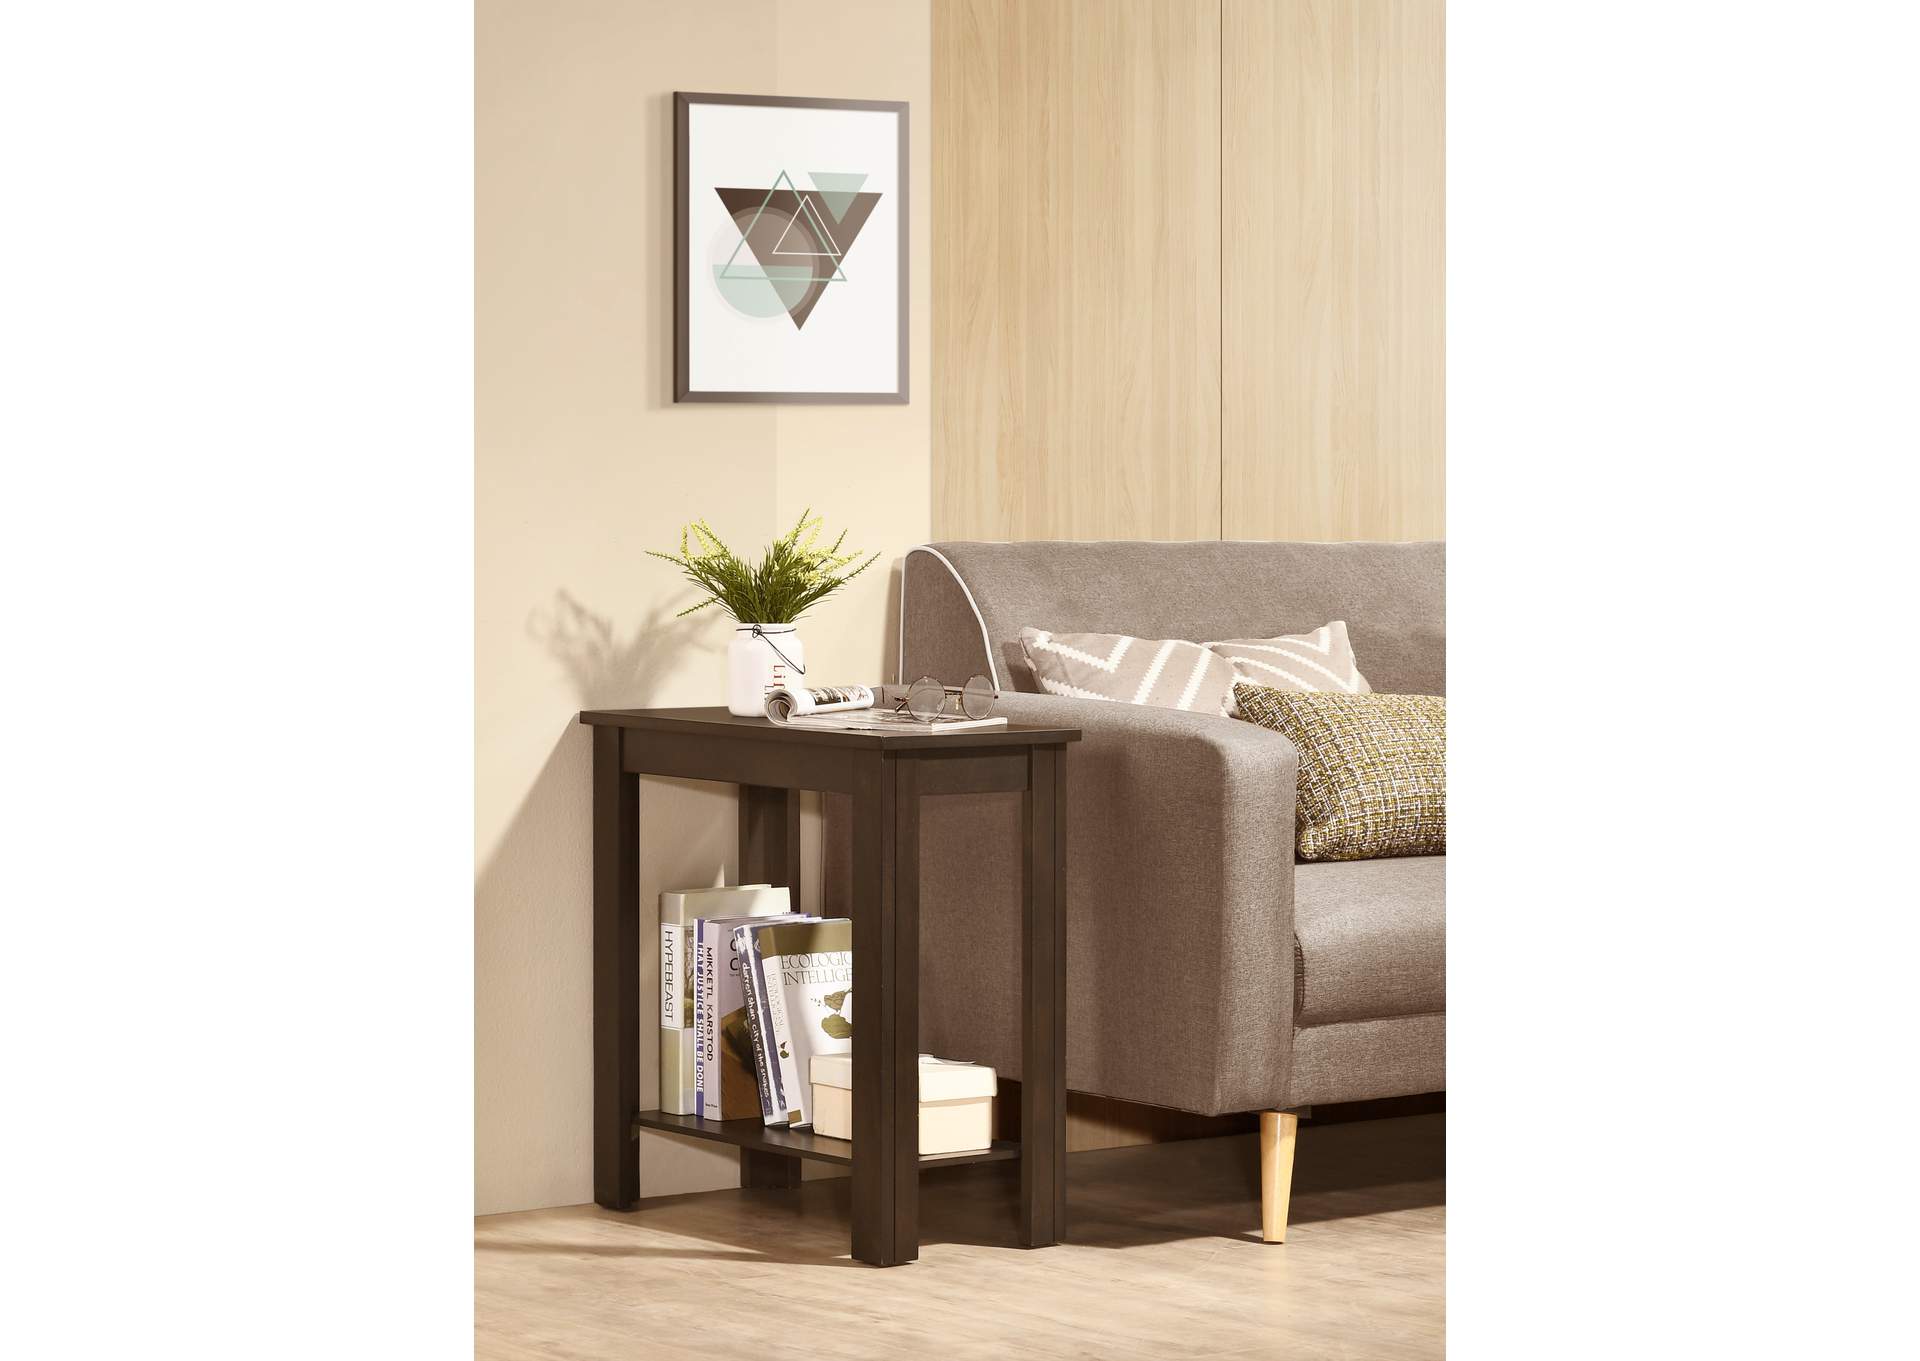 Pierce Chairside Table Charcoal,Crown Mark